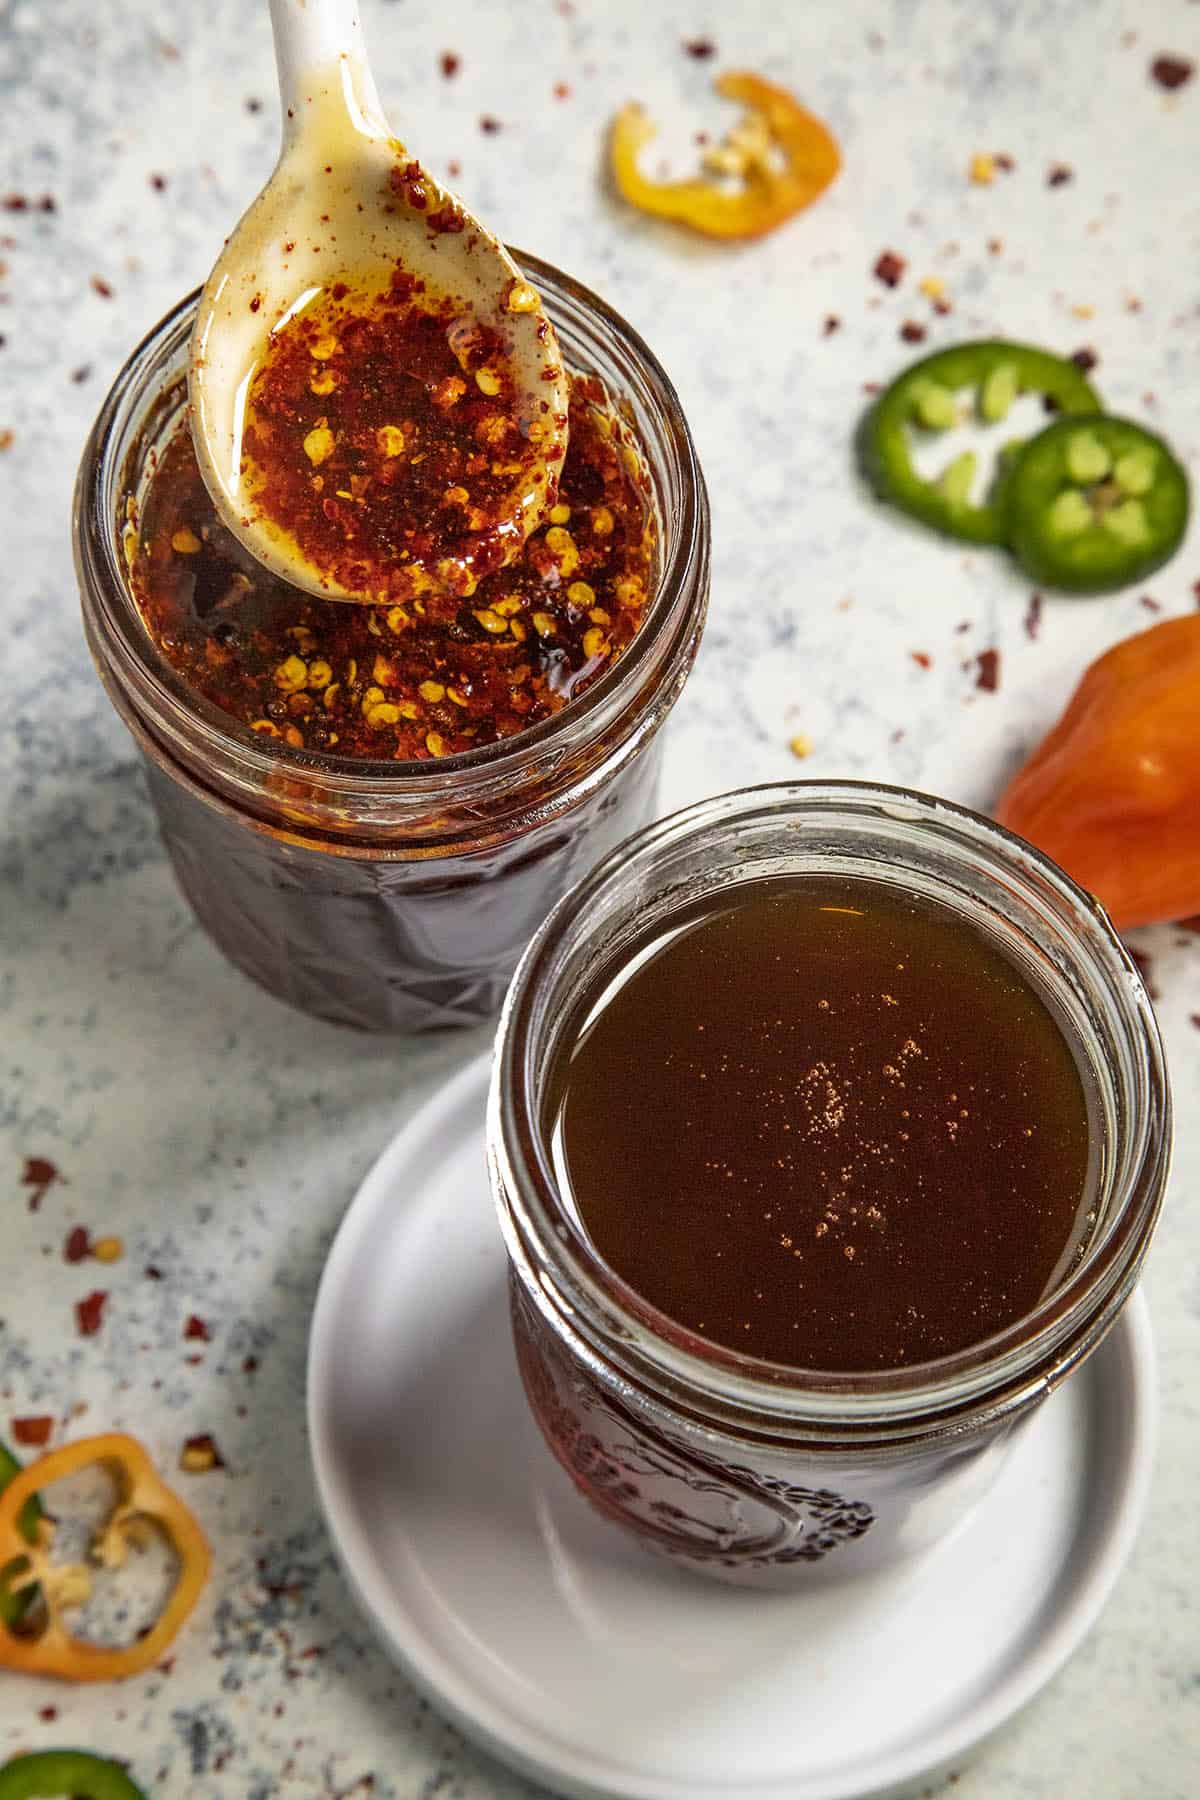 Hot honey in a jar with chili flakes next to a jar of strained hot honey